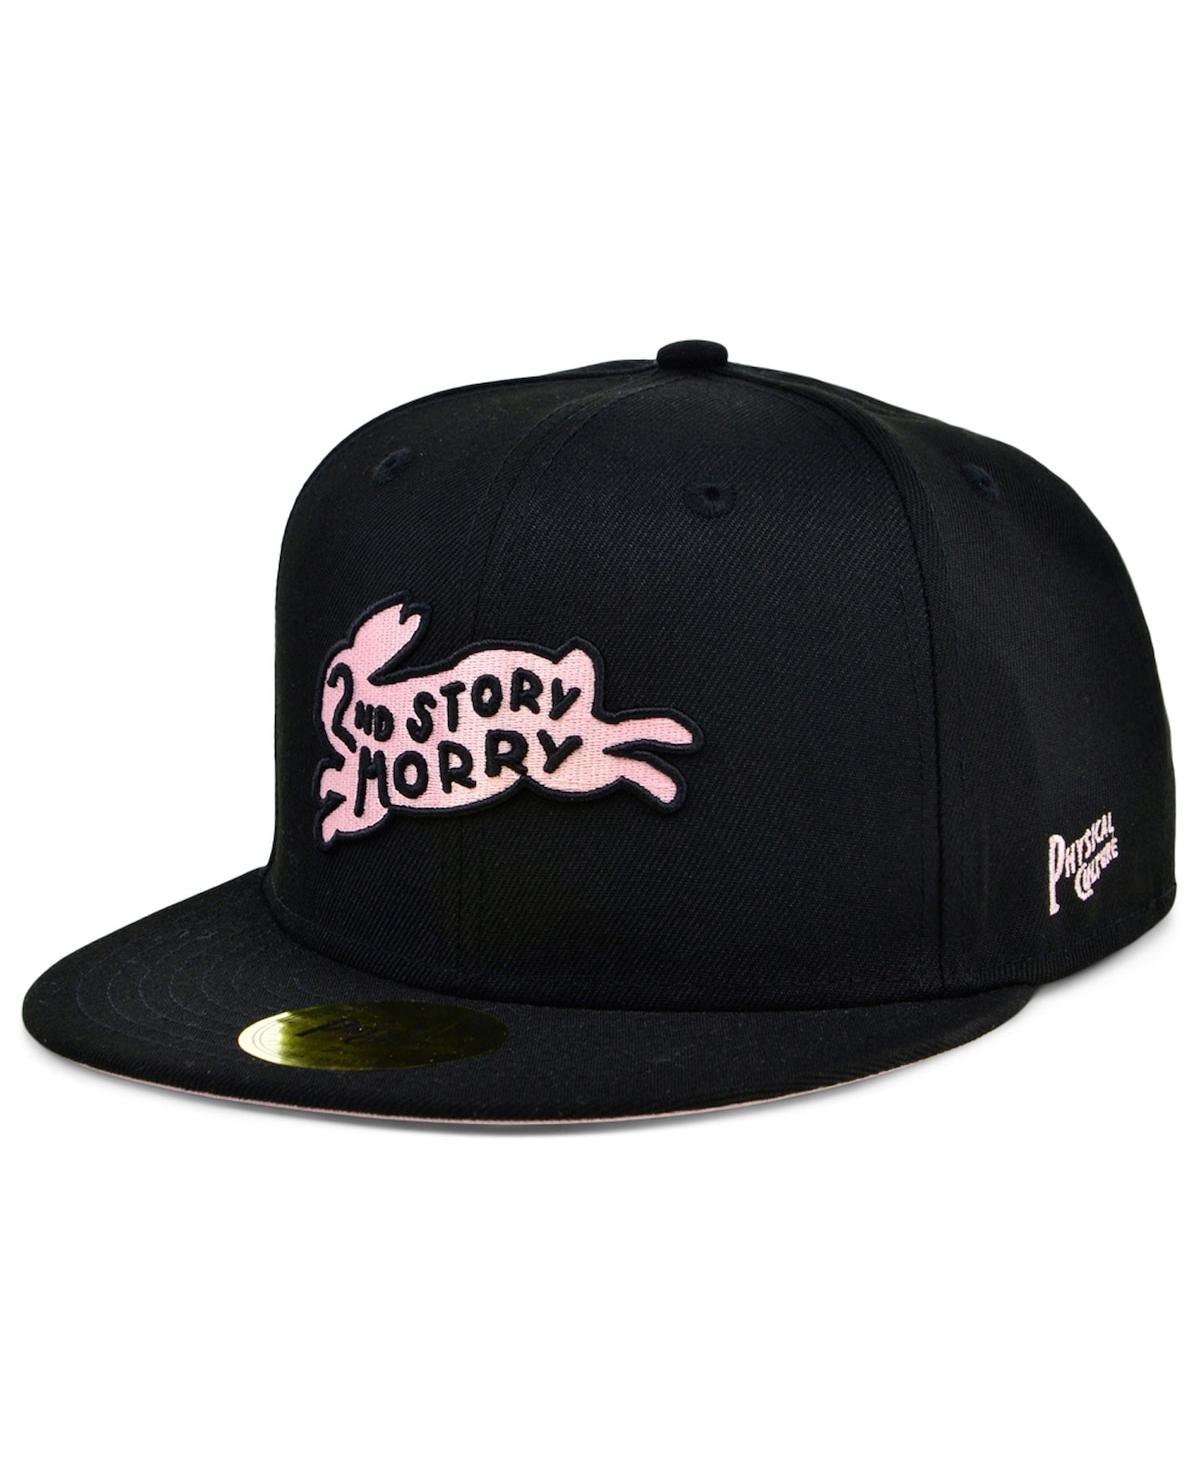 Shop Physical Culture Men's  Black Second Story Morrys Black Fives Fitted Hat